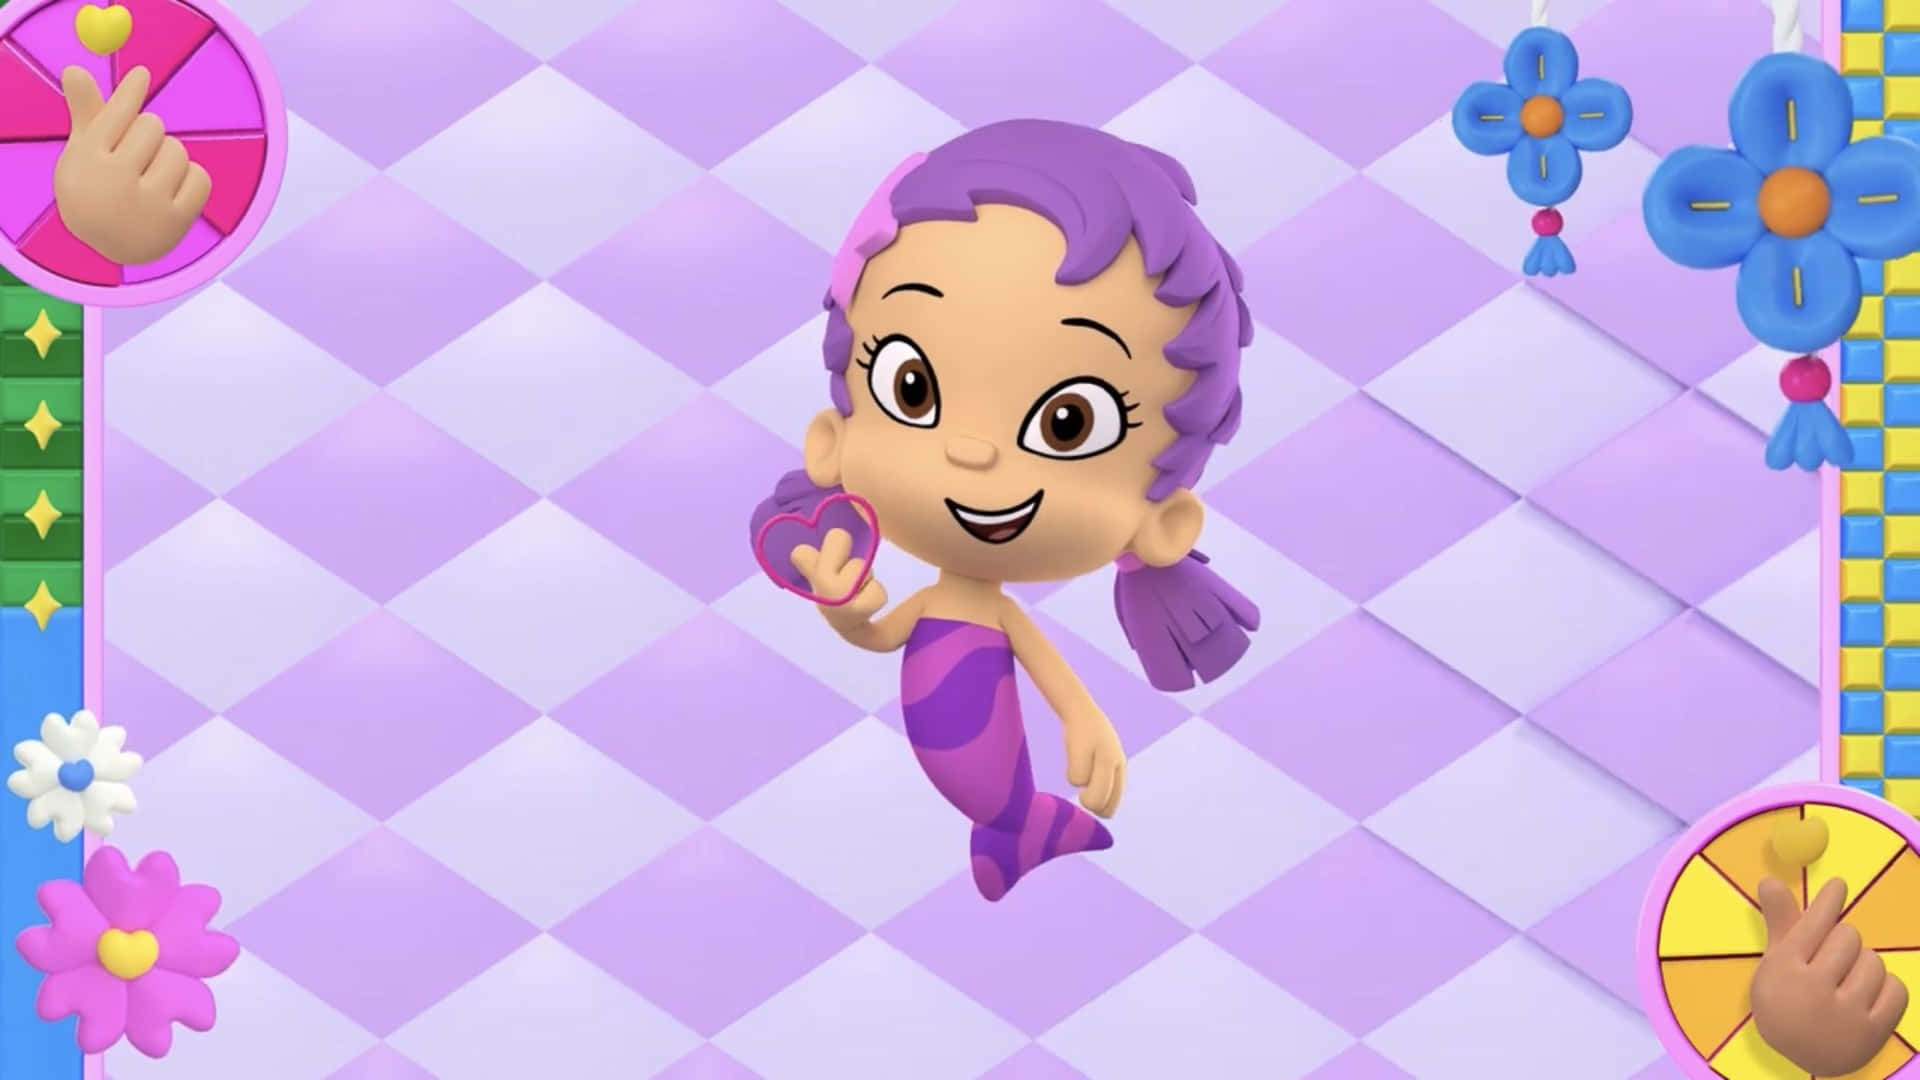 Join the Bubble Guppies on a fun and adventure-filled underwater journey!